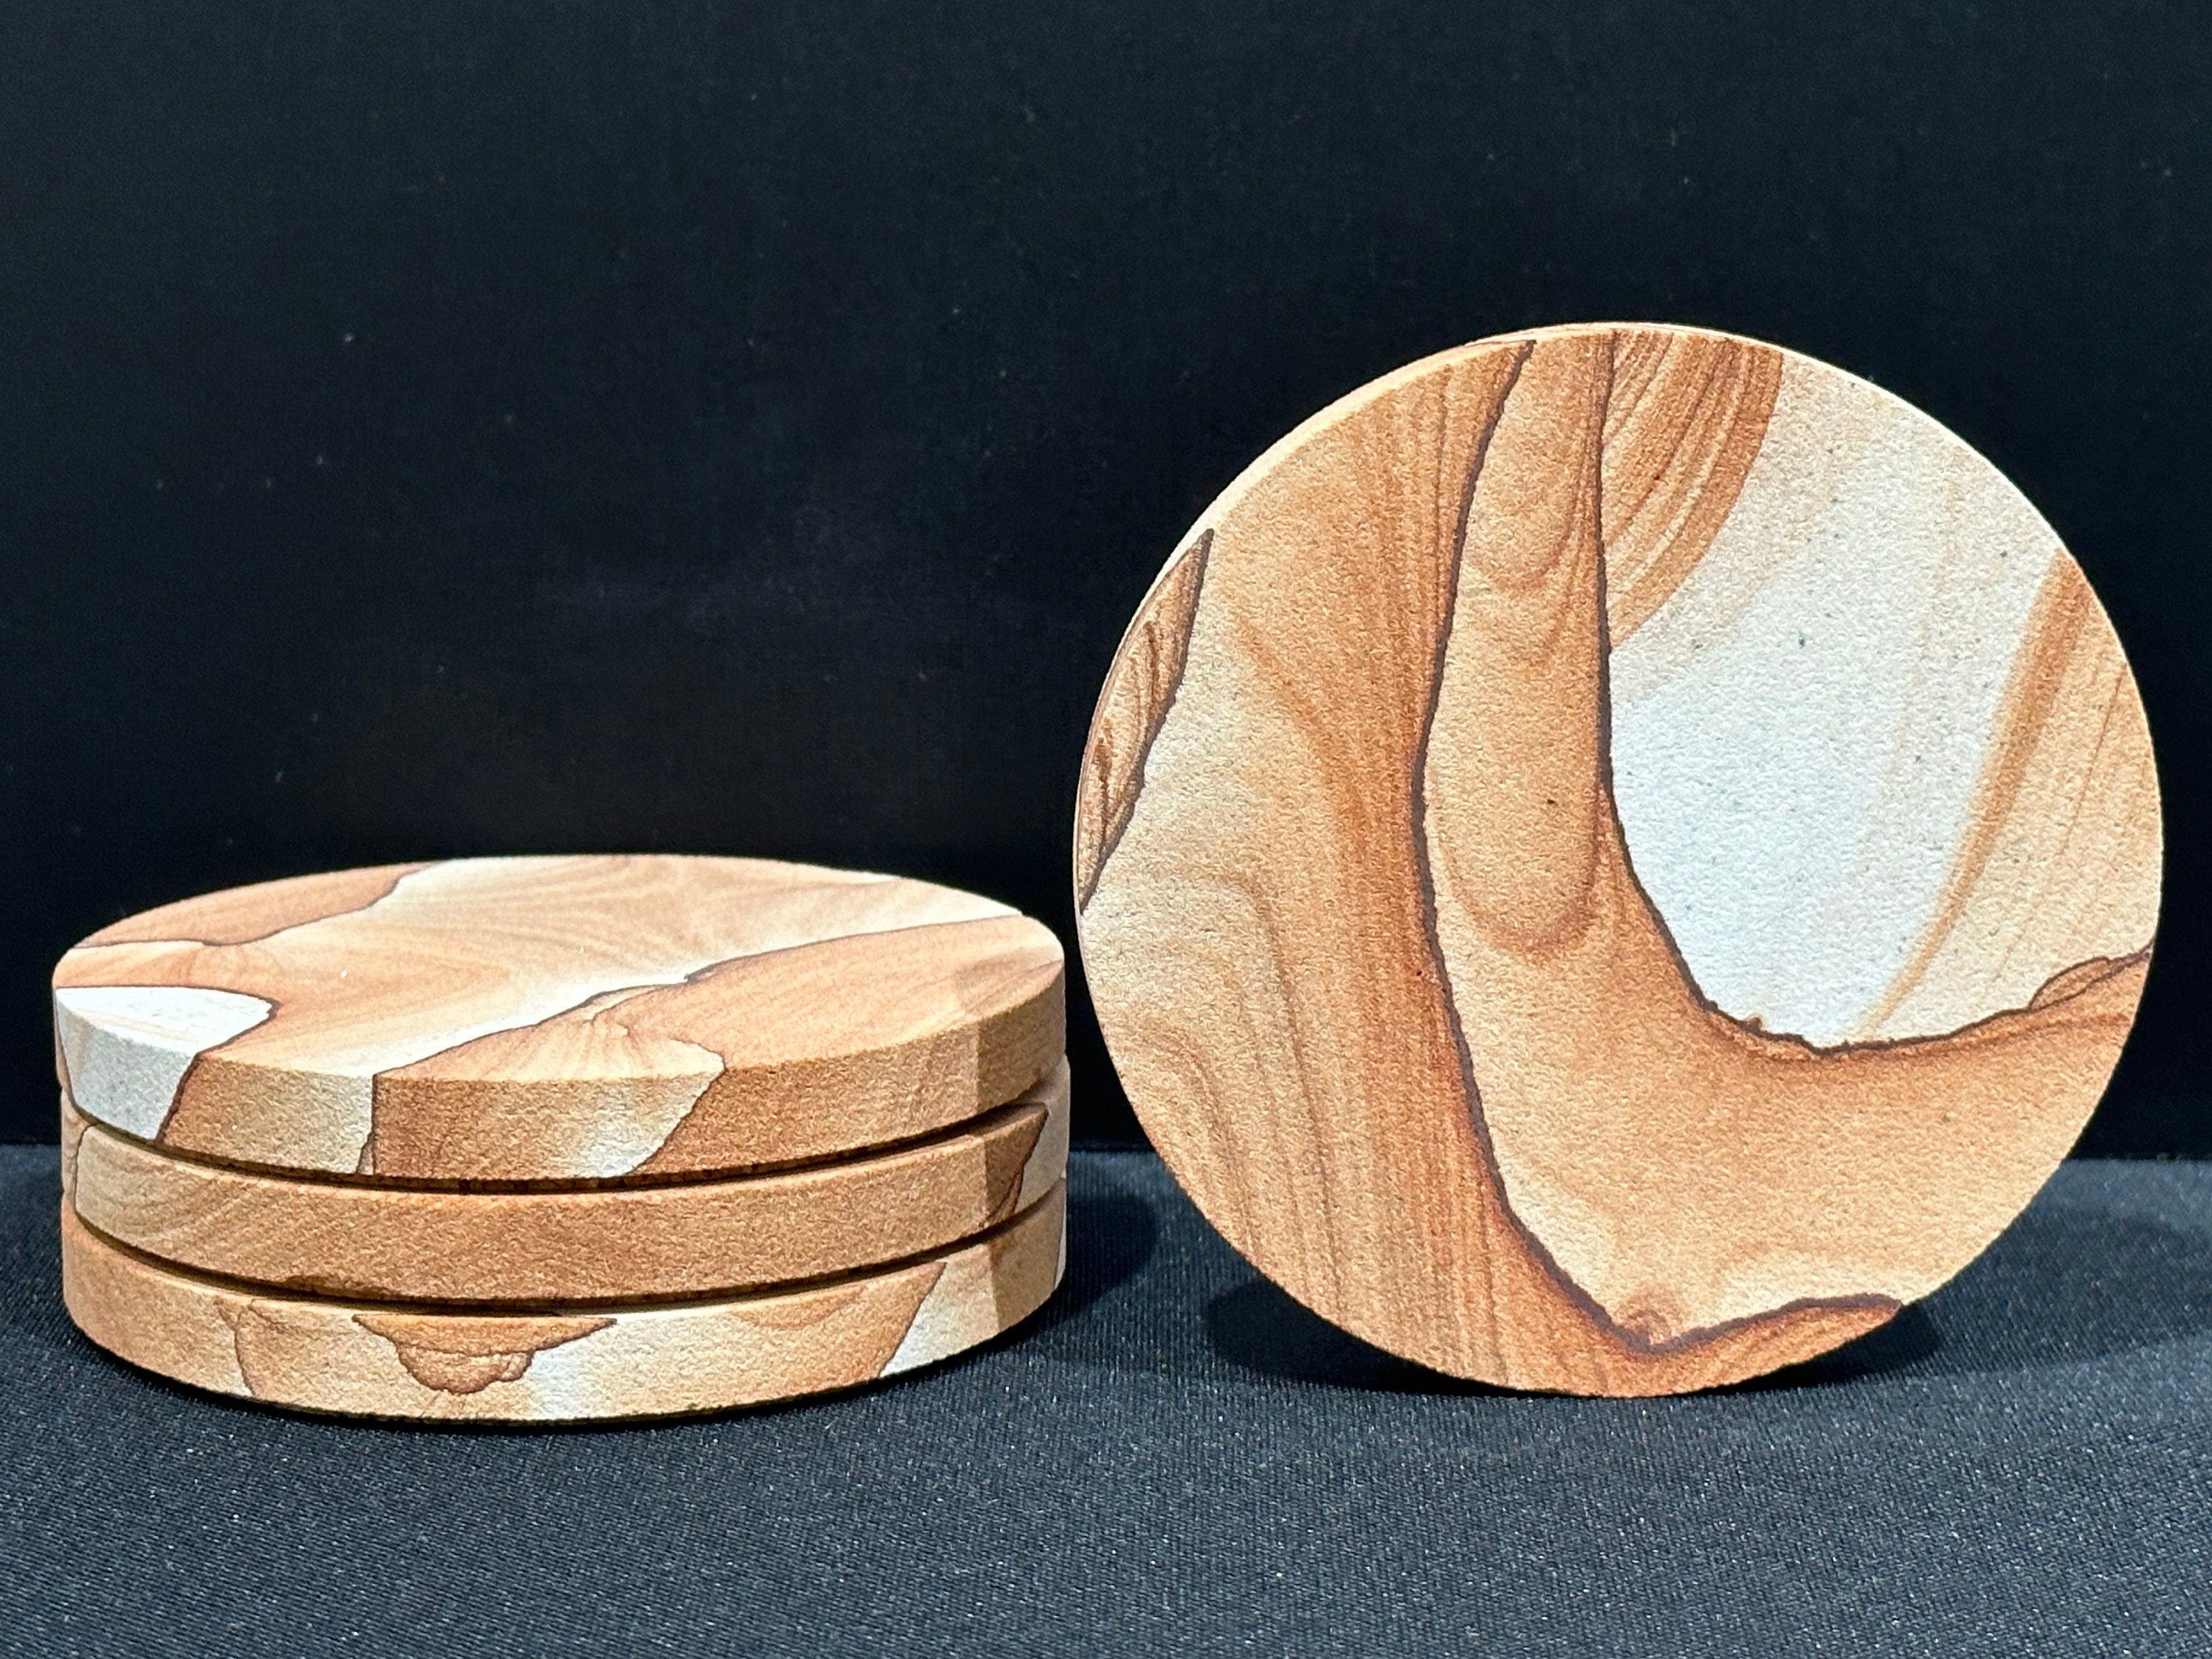 Desert Sunset Sandstone Coasters - Handcrafted Drink Coasters (4 Pc) for Home and Kitchen table, Surface Protection. Natural Stone Absorbent